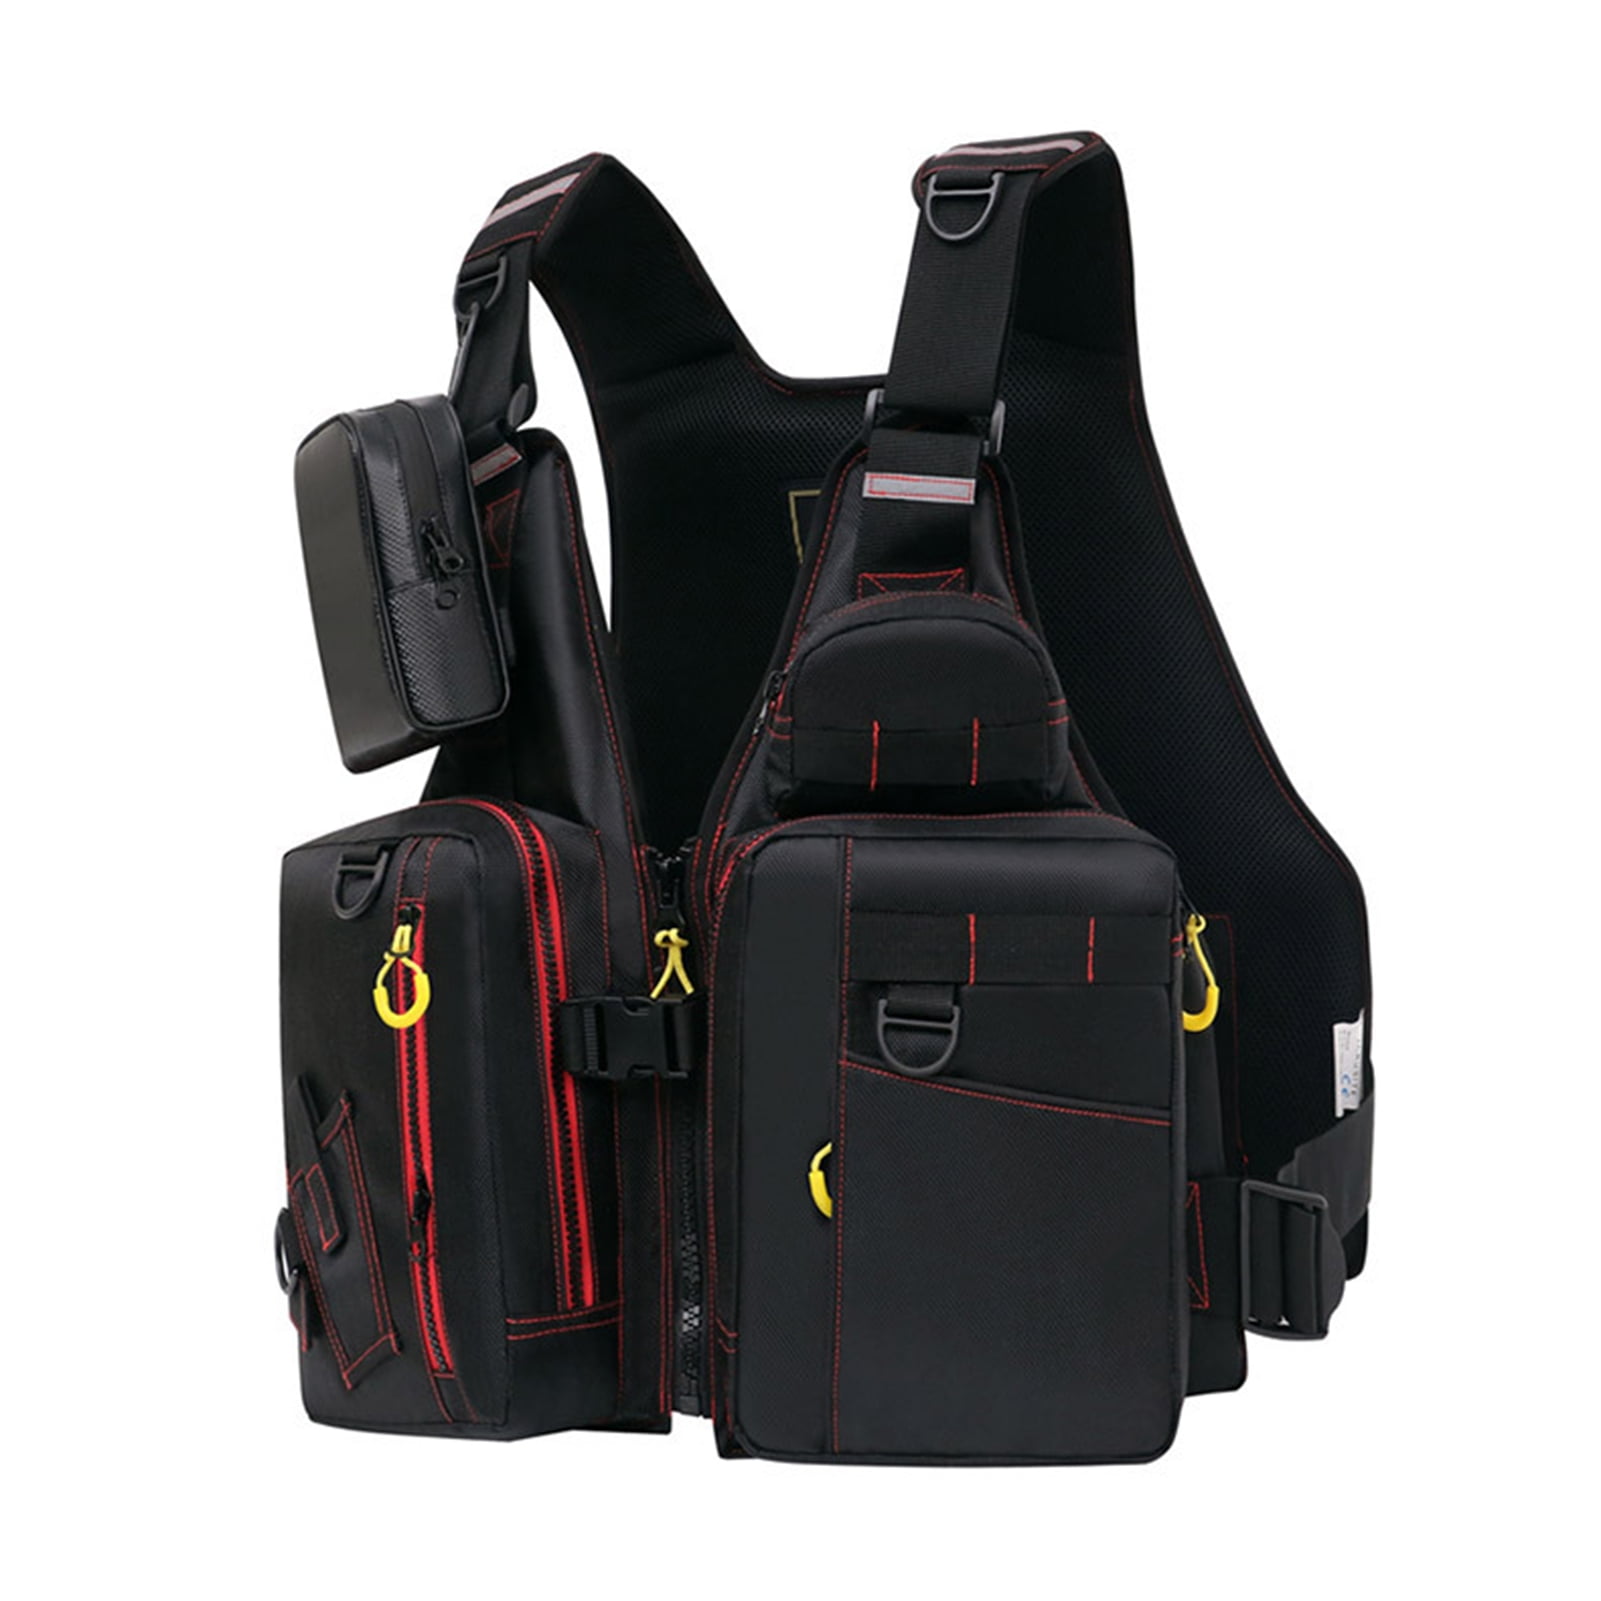 Adjustable Fishing Vest with High Buoyancy and Multi Pockets - emphasizes  the vest's adjustability and high buoyancy, while still highlighting the  multiple pockets 